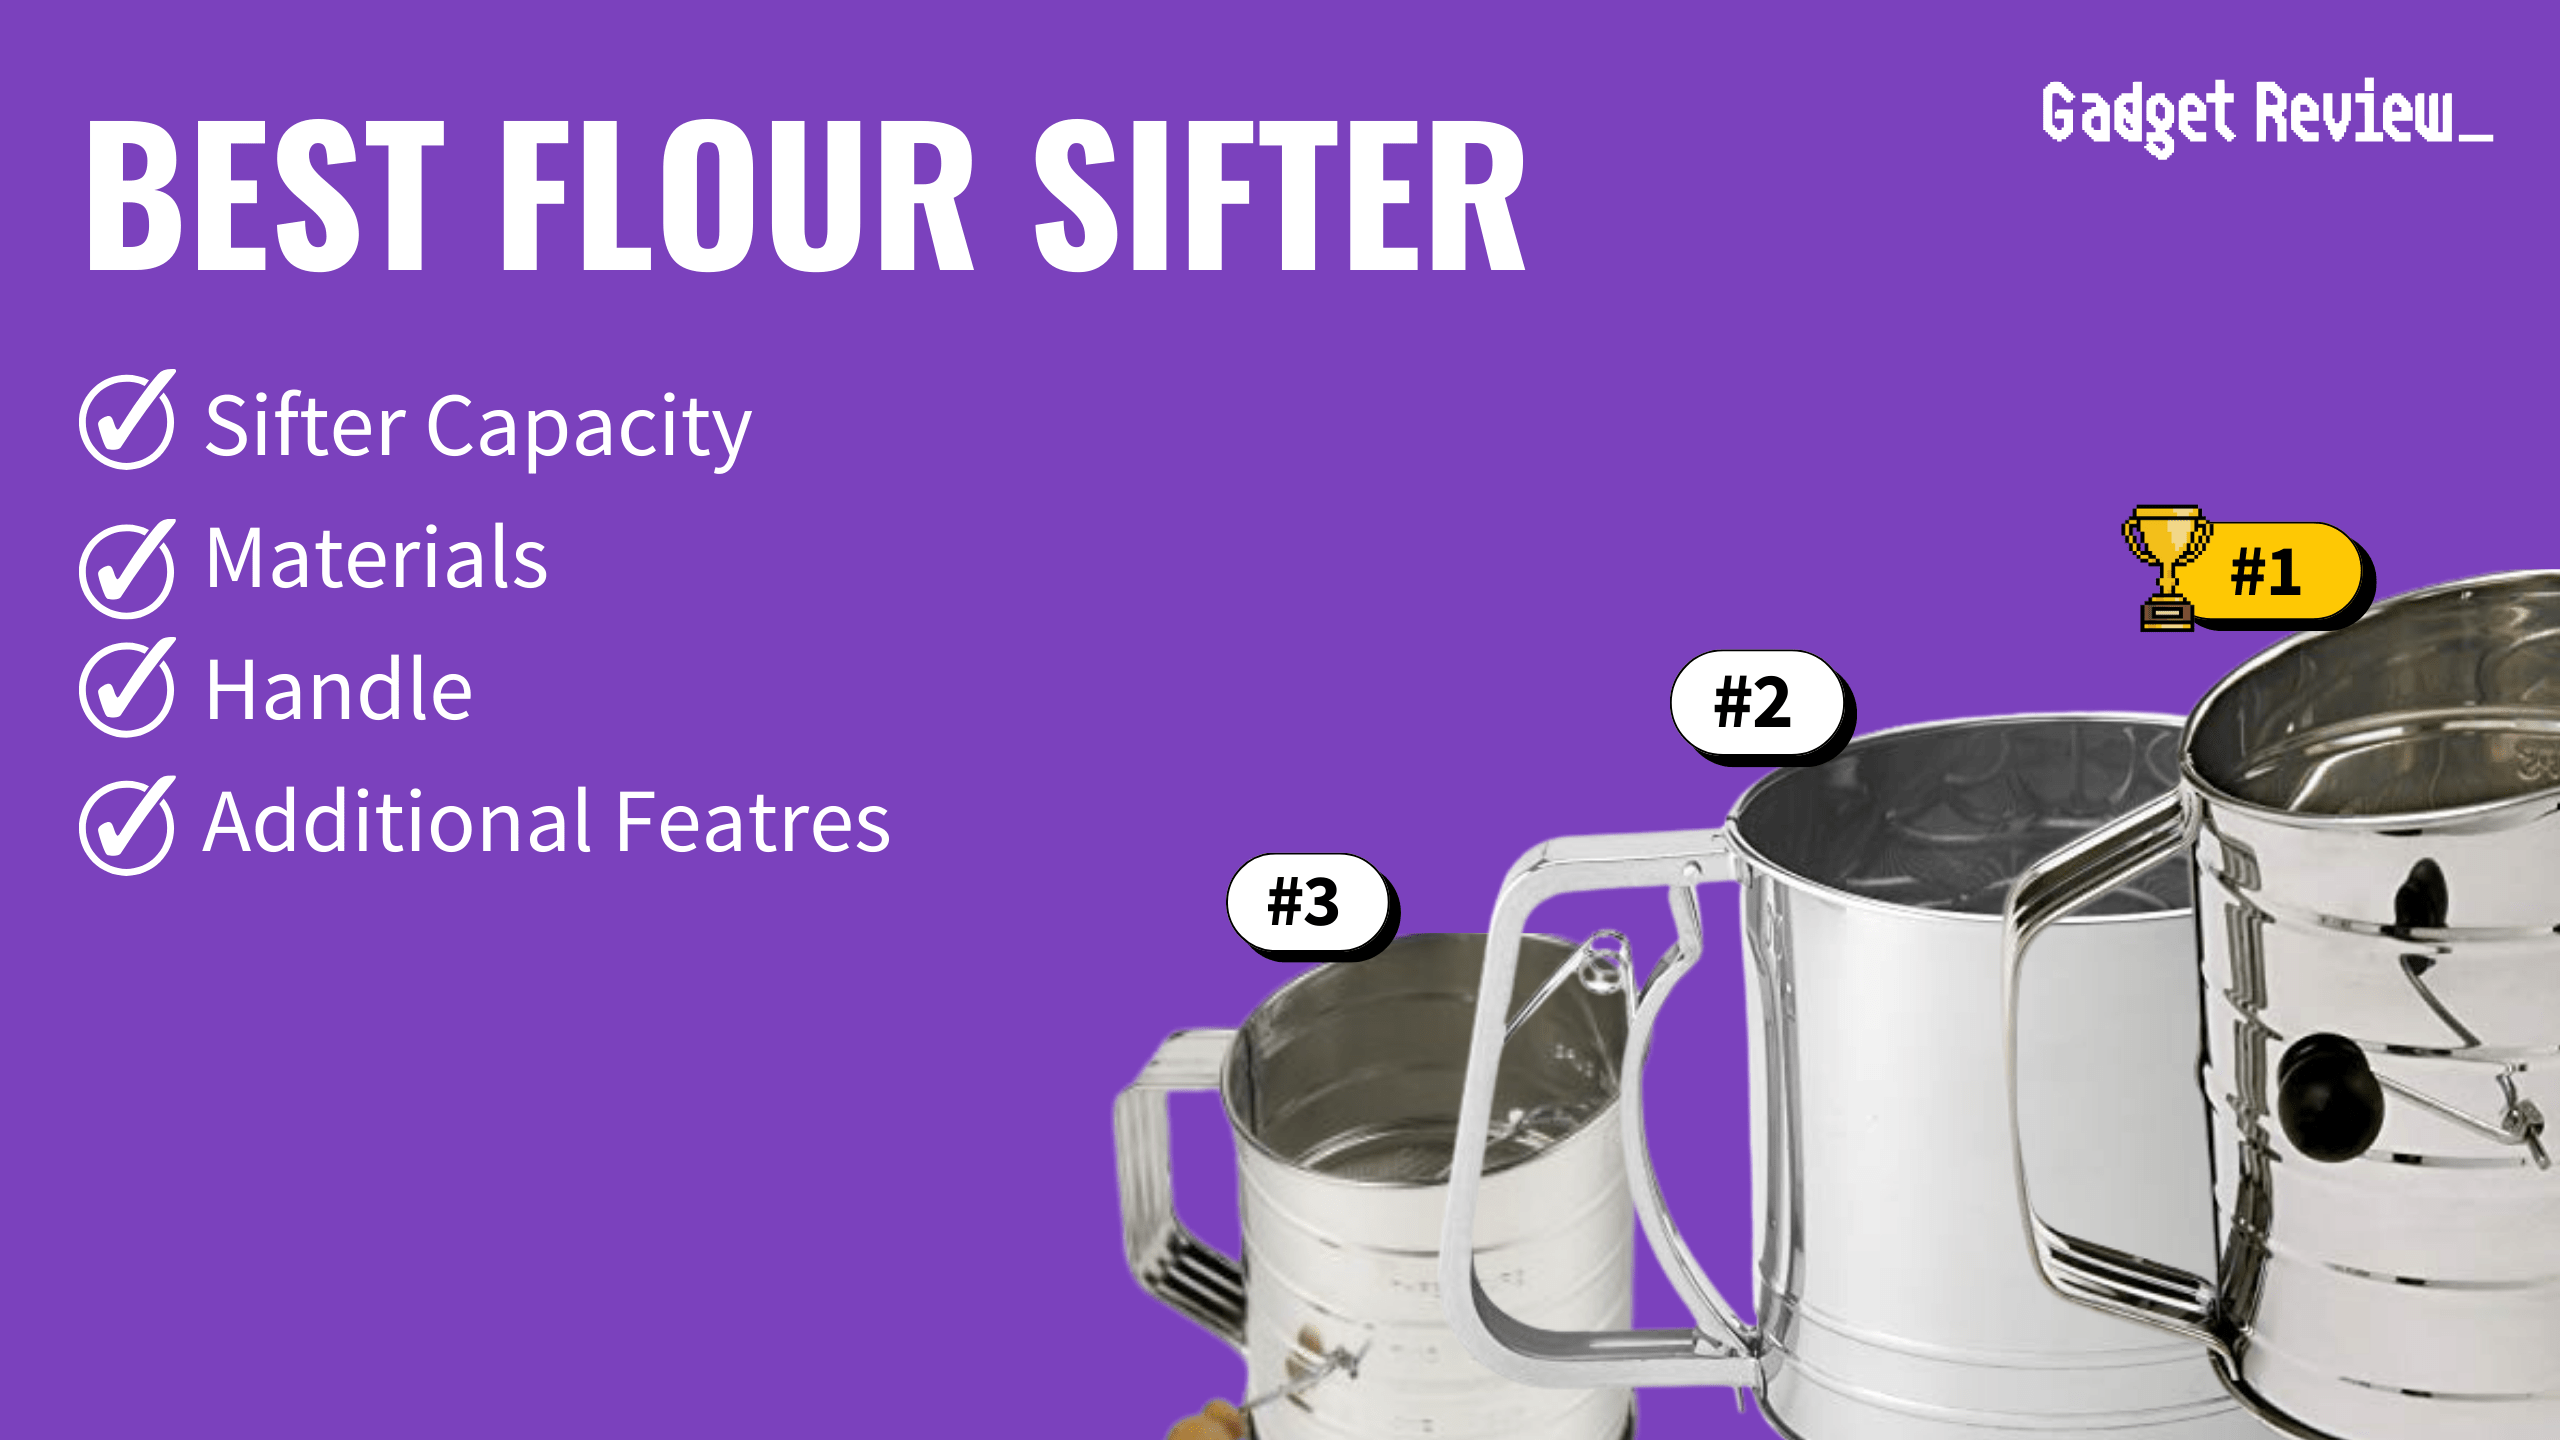 best flour sifter featured image that shows the top three best kitchen product models